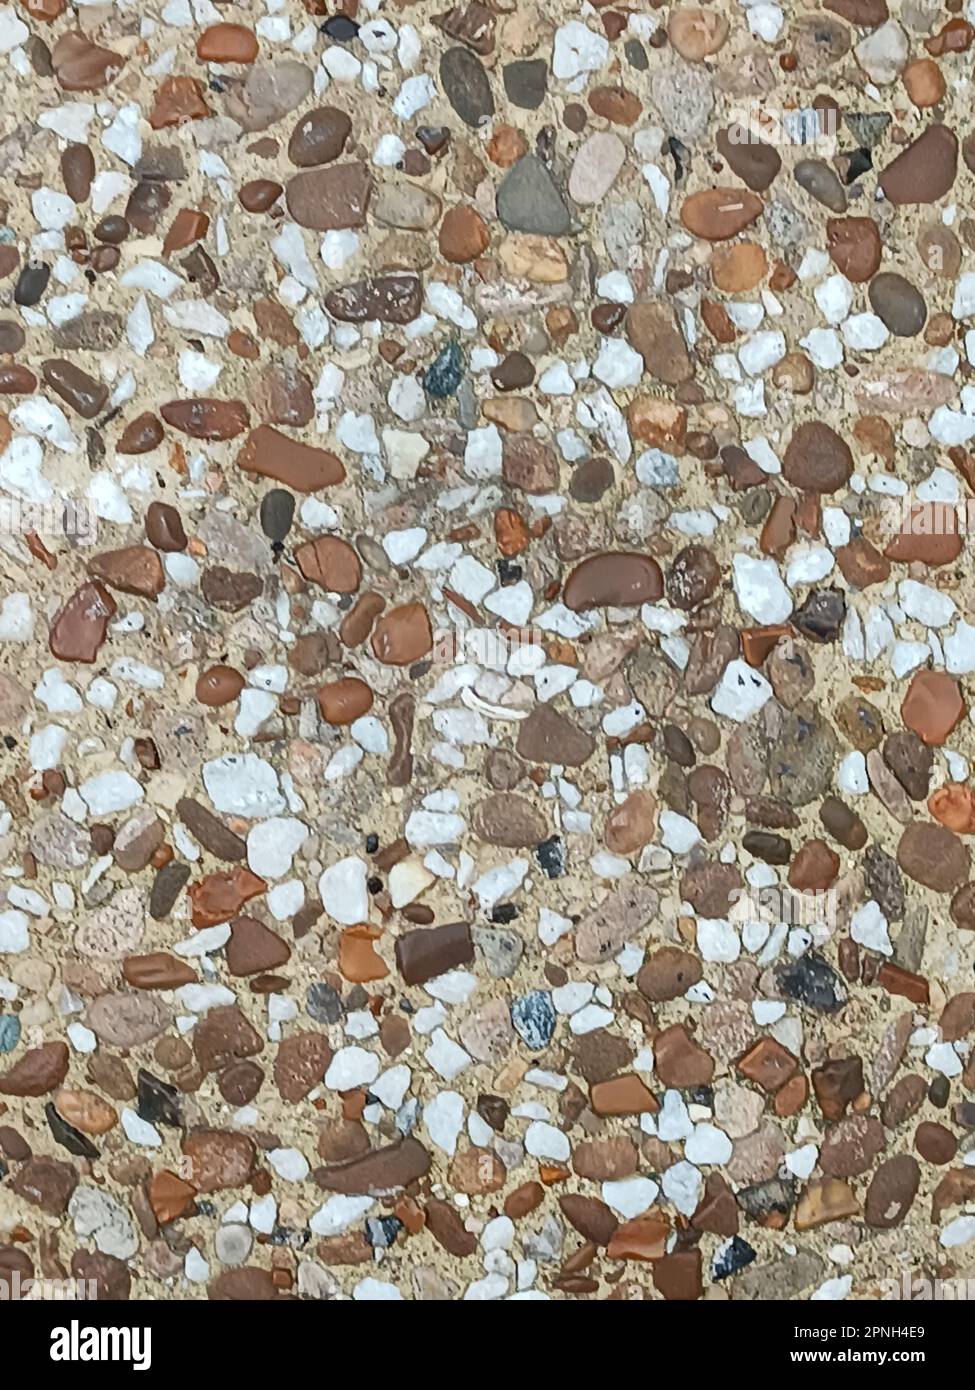 Fine gravel texture. Abstract background with small stones. Stock Photo